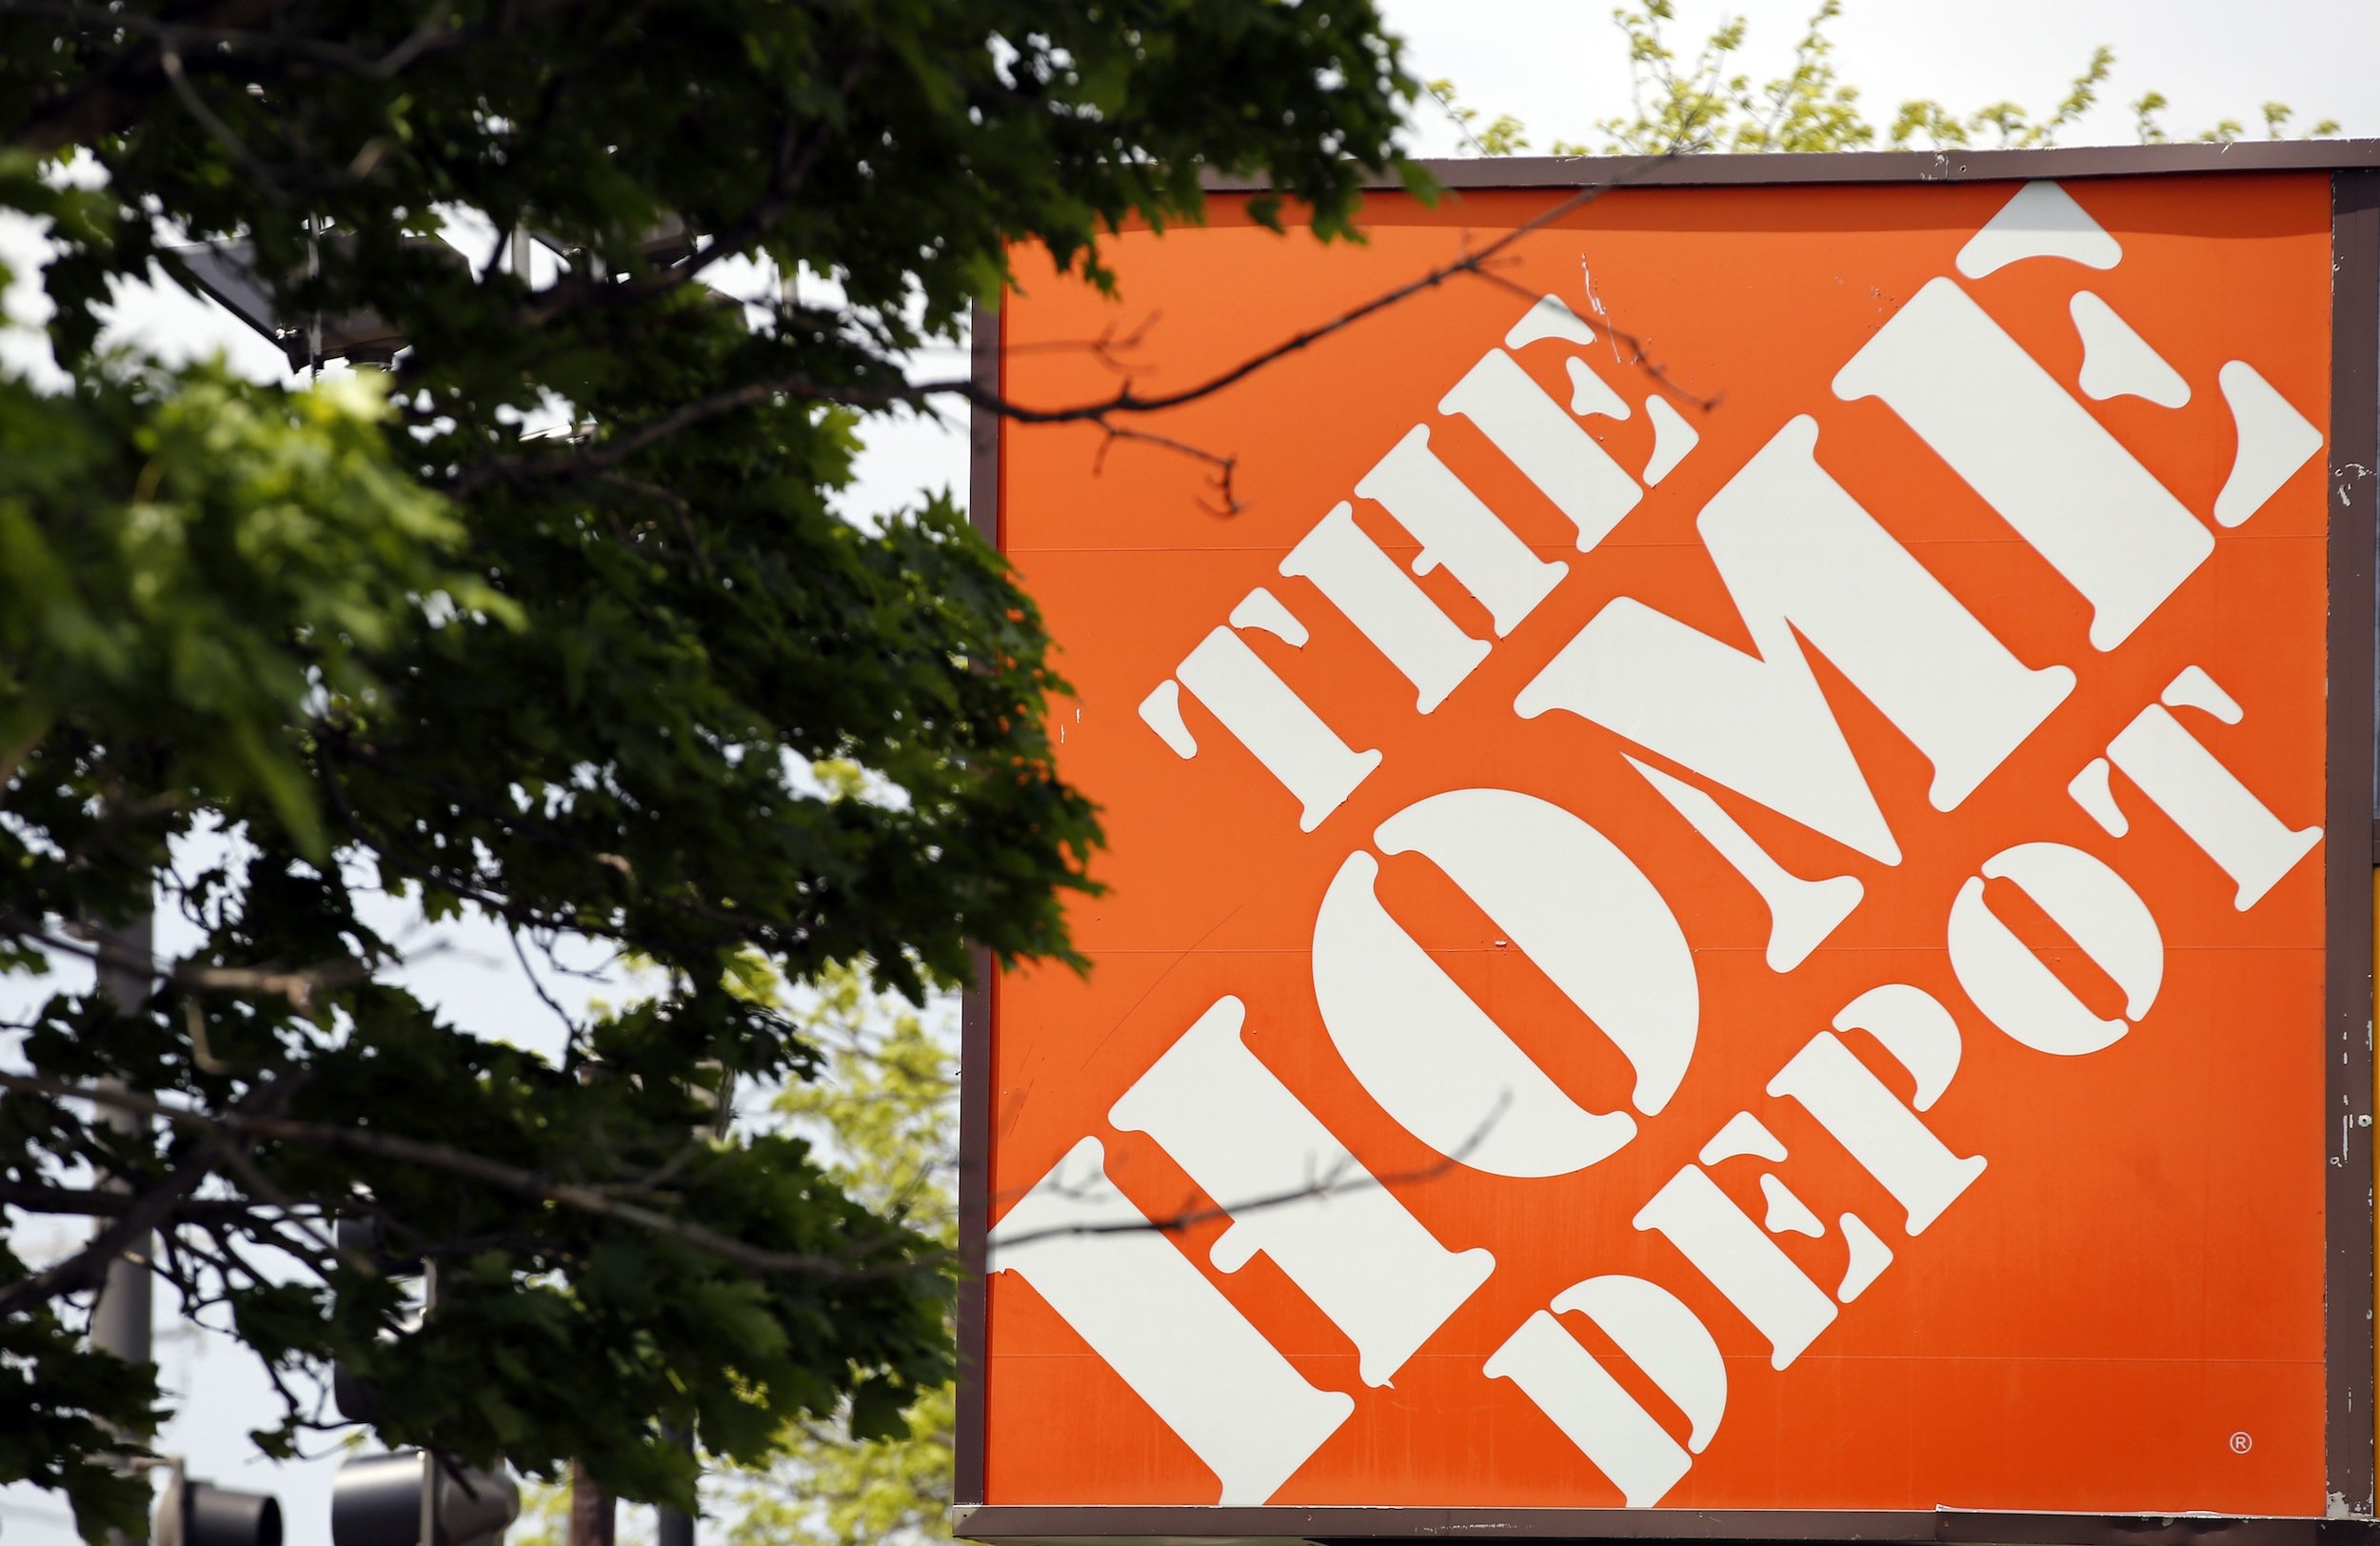 Home Depot Says Probing 'Unusual Activity' After Data Breach Report